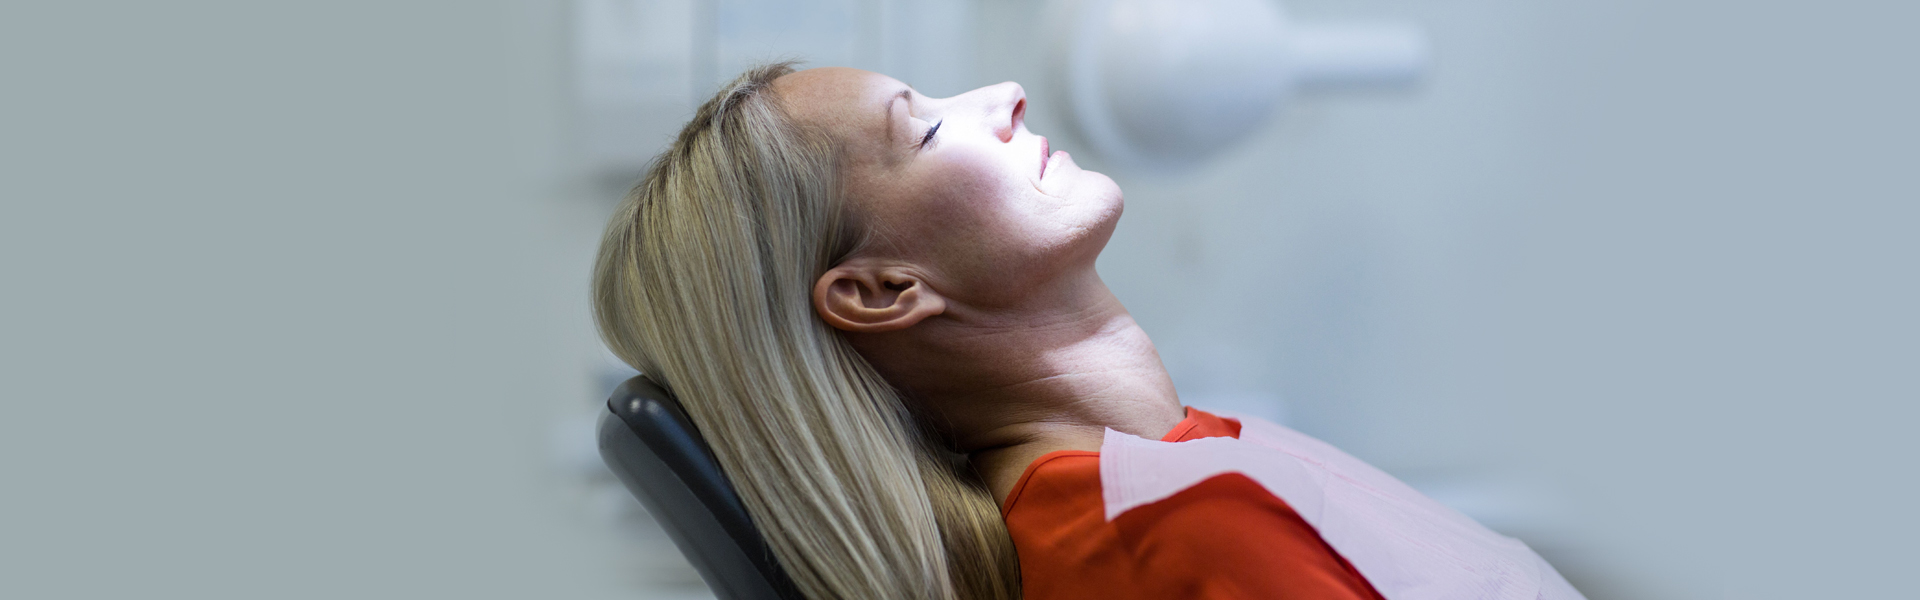 The 3 Main Sedation Types, Their Side Effects, and Risks